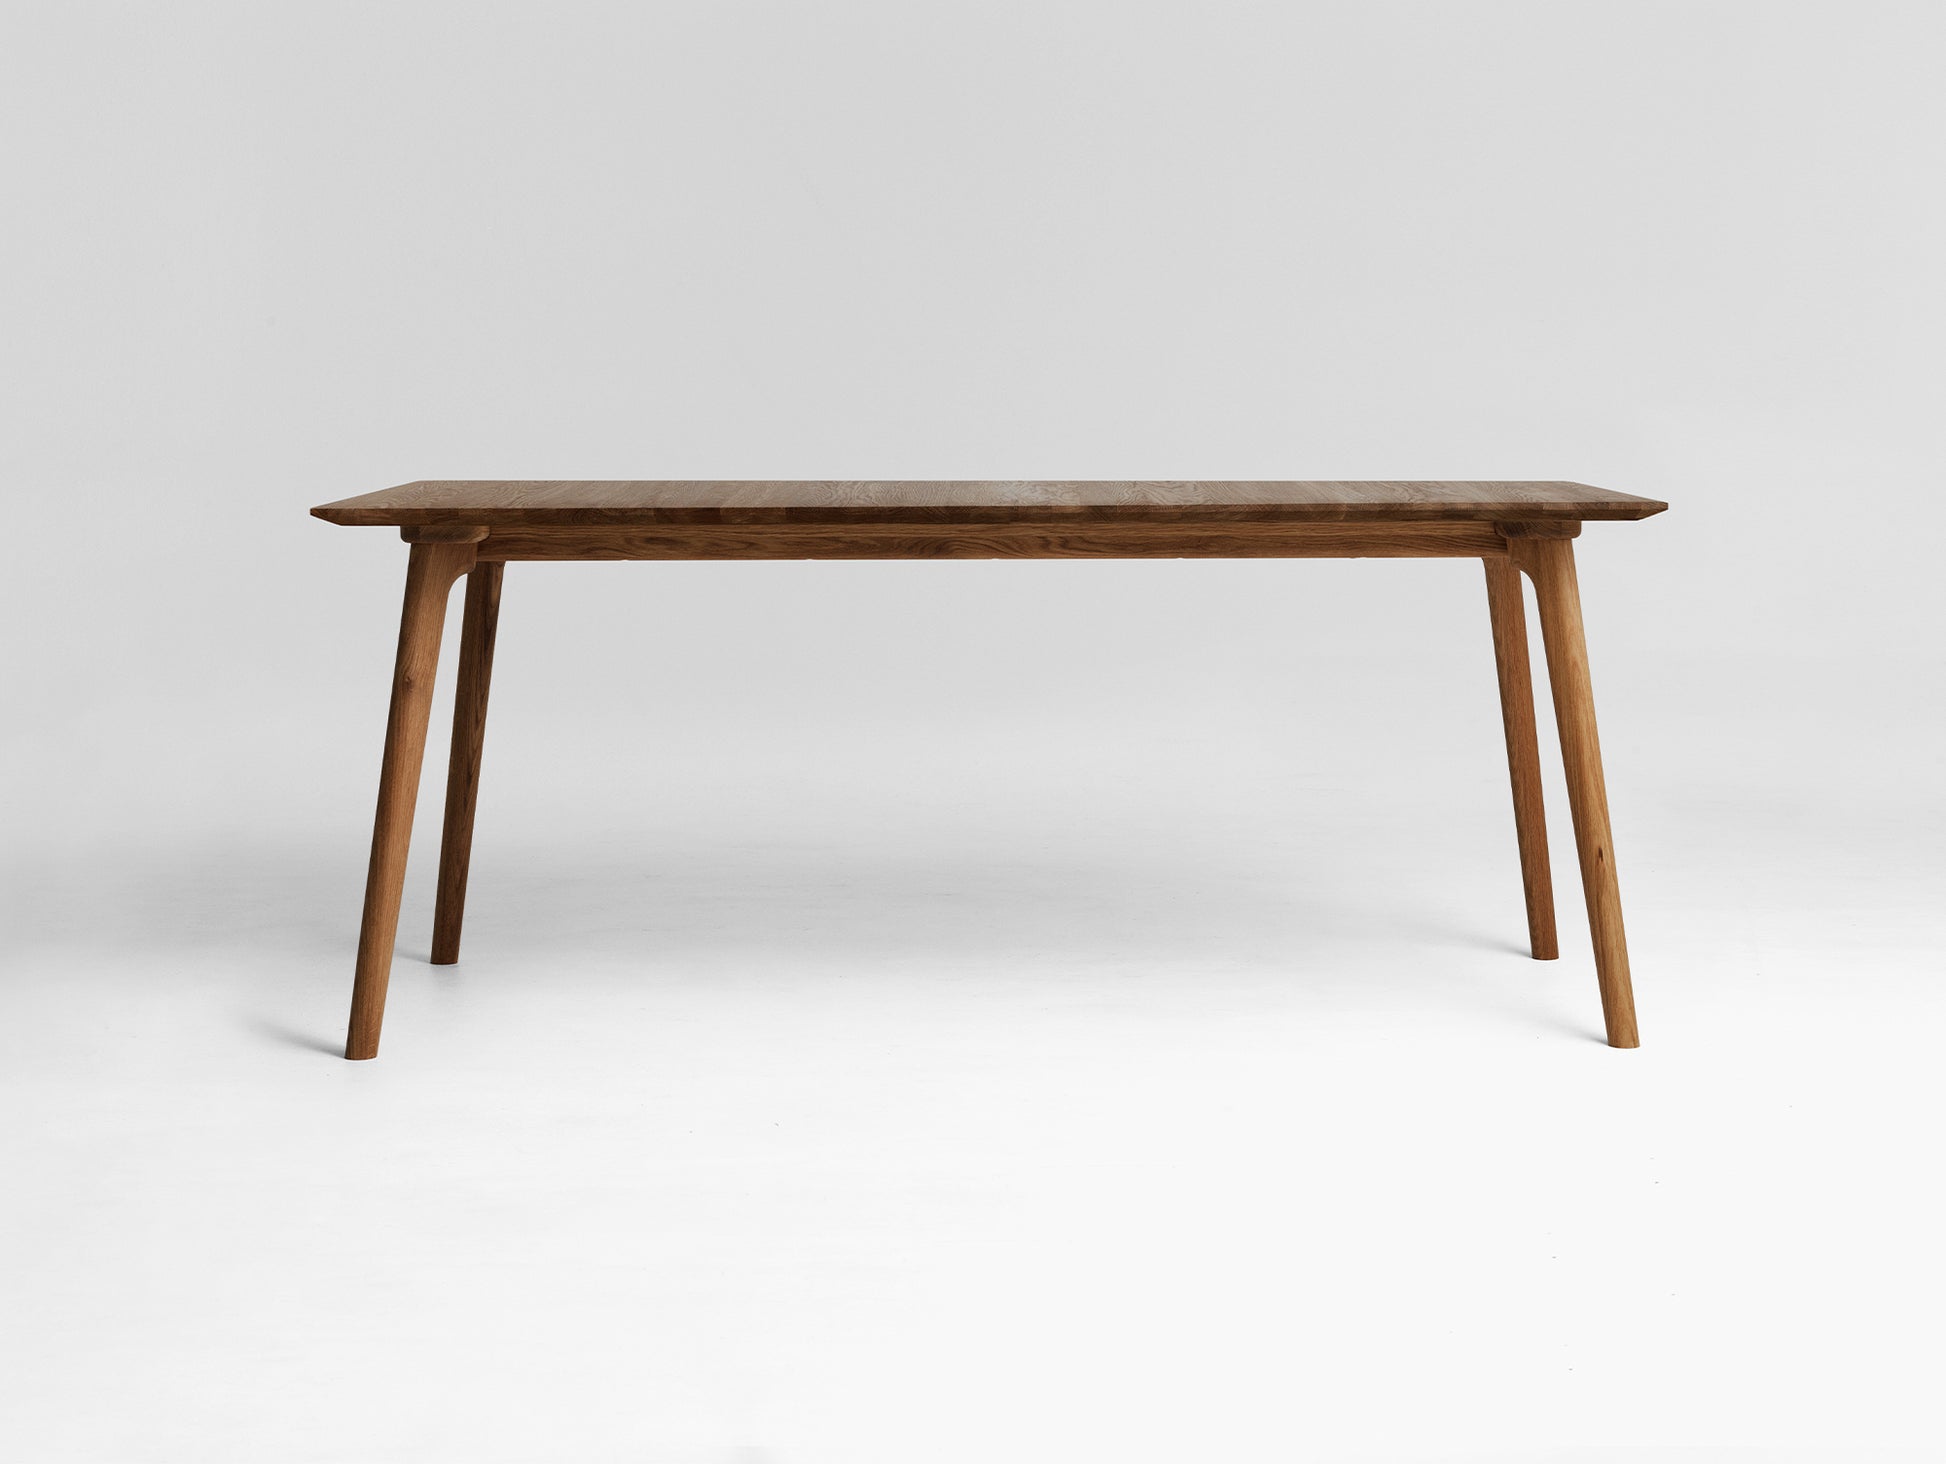 Salon Dining Table by Ro Collection - 180 x 90 cm in Smoked Oak